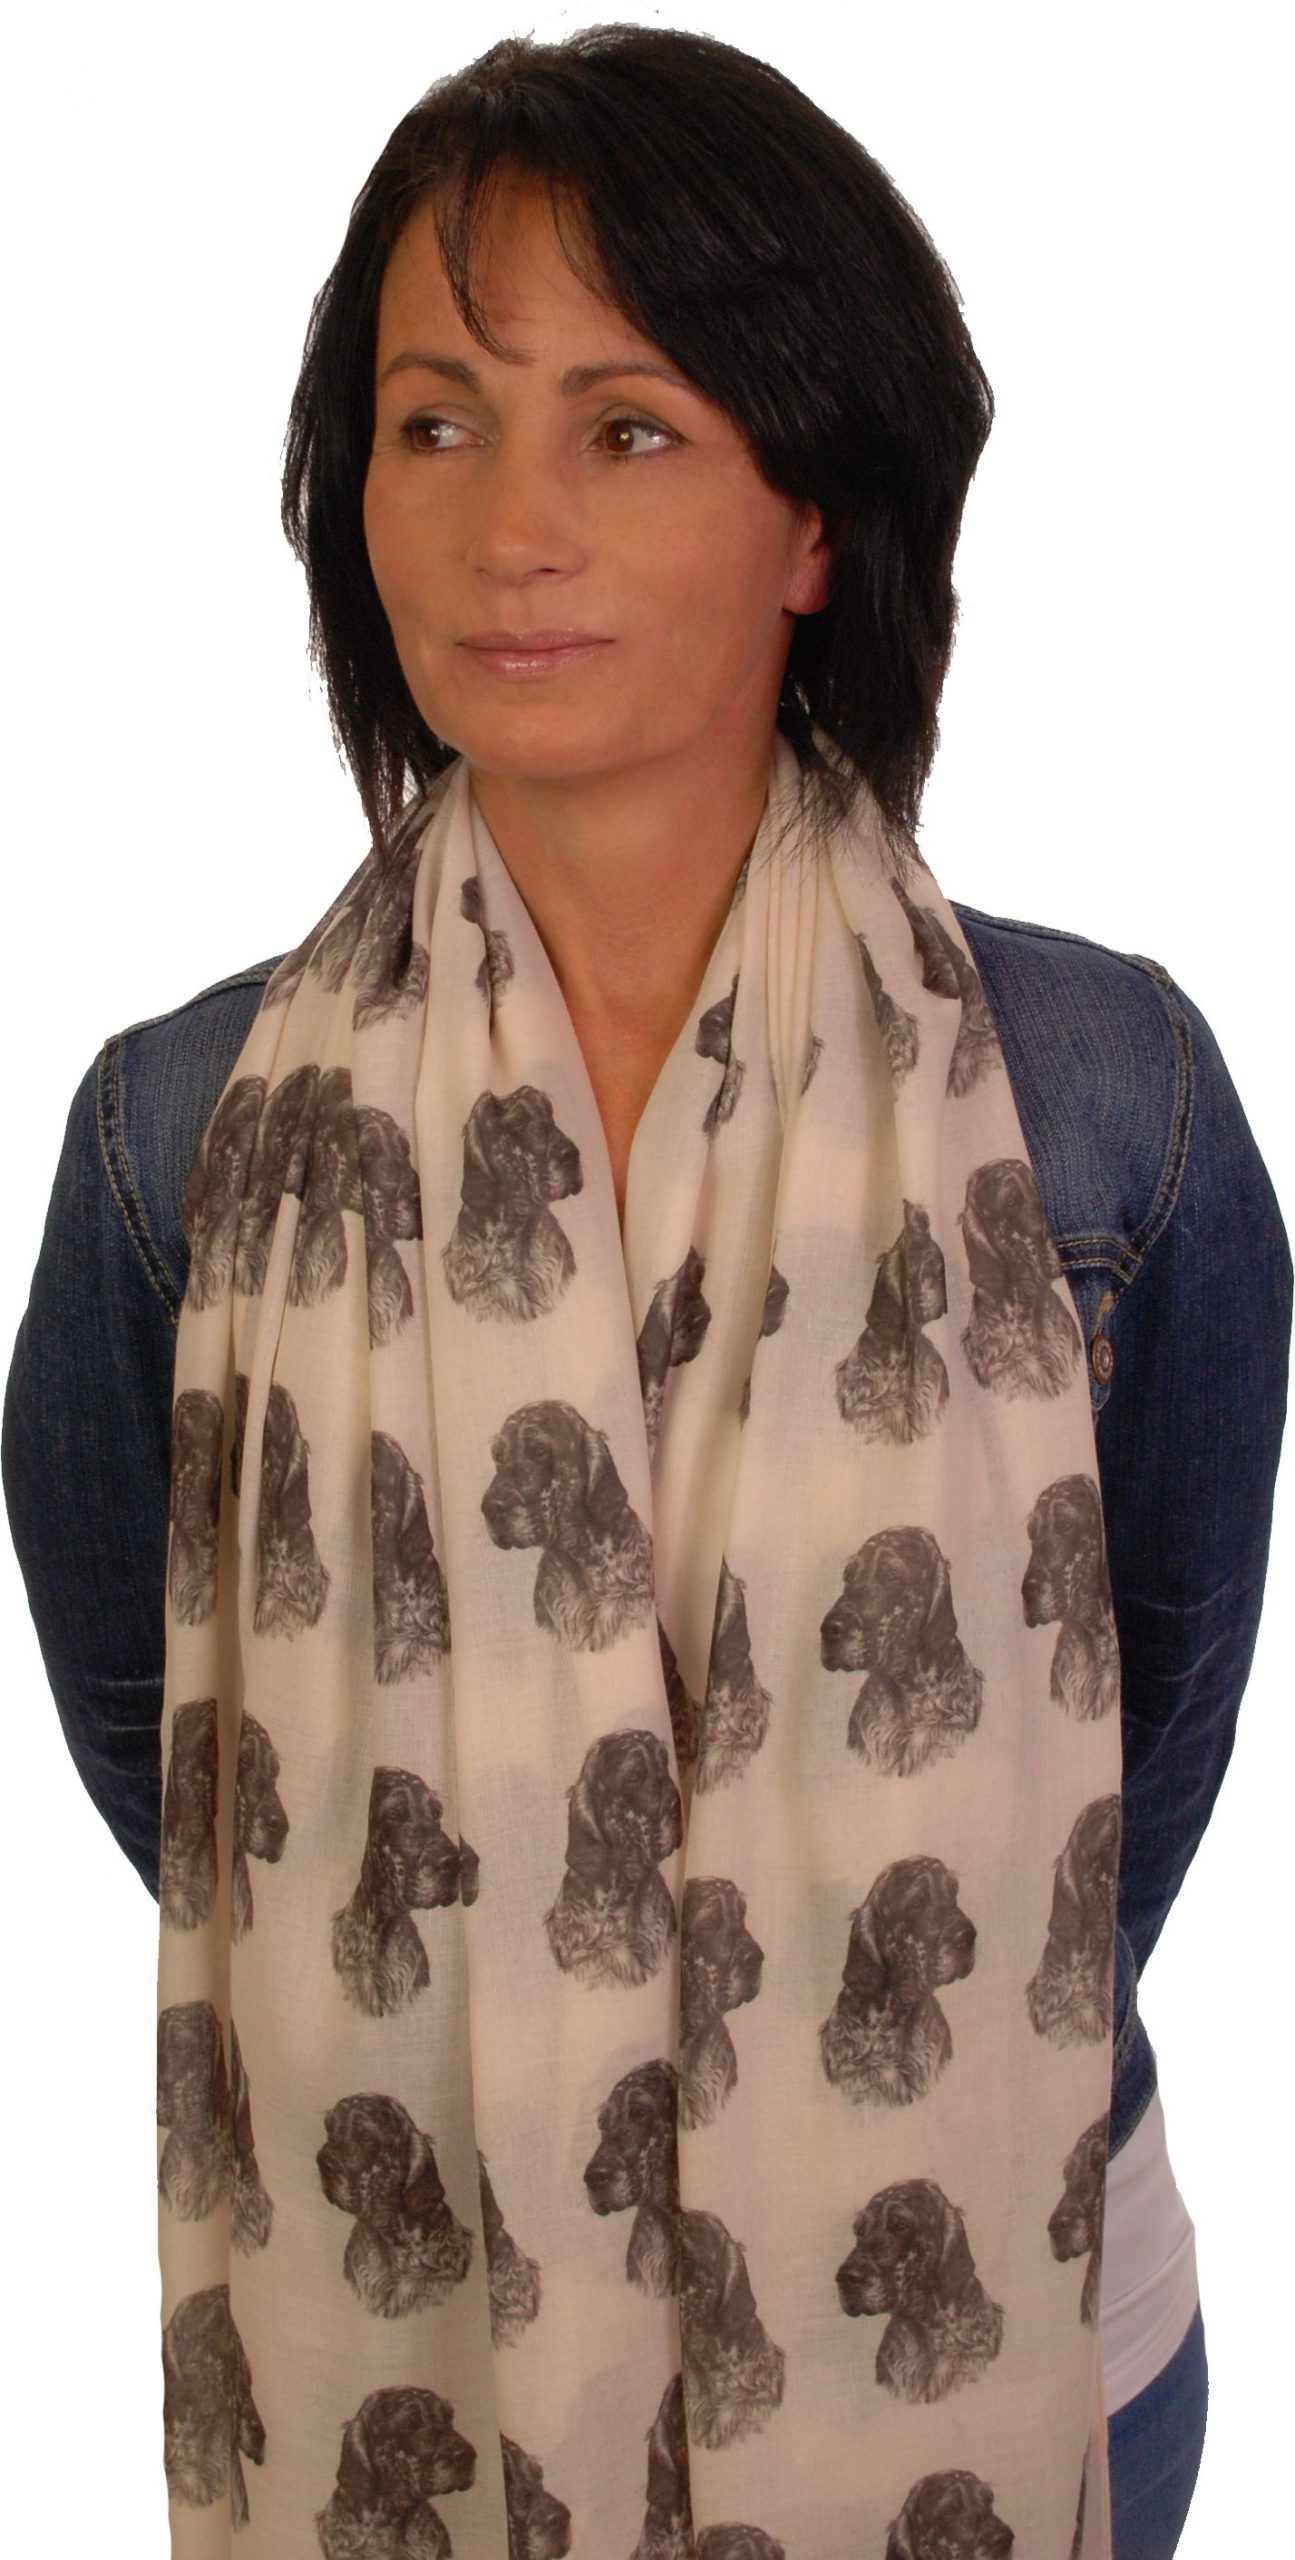 Mike Sibley English Setter licensed design ladies fashion scarf